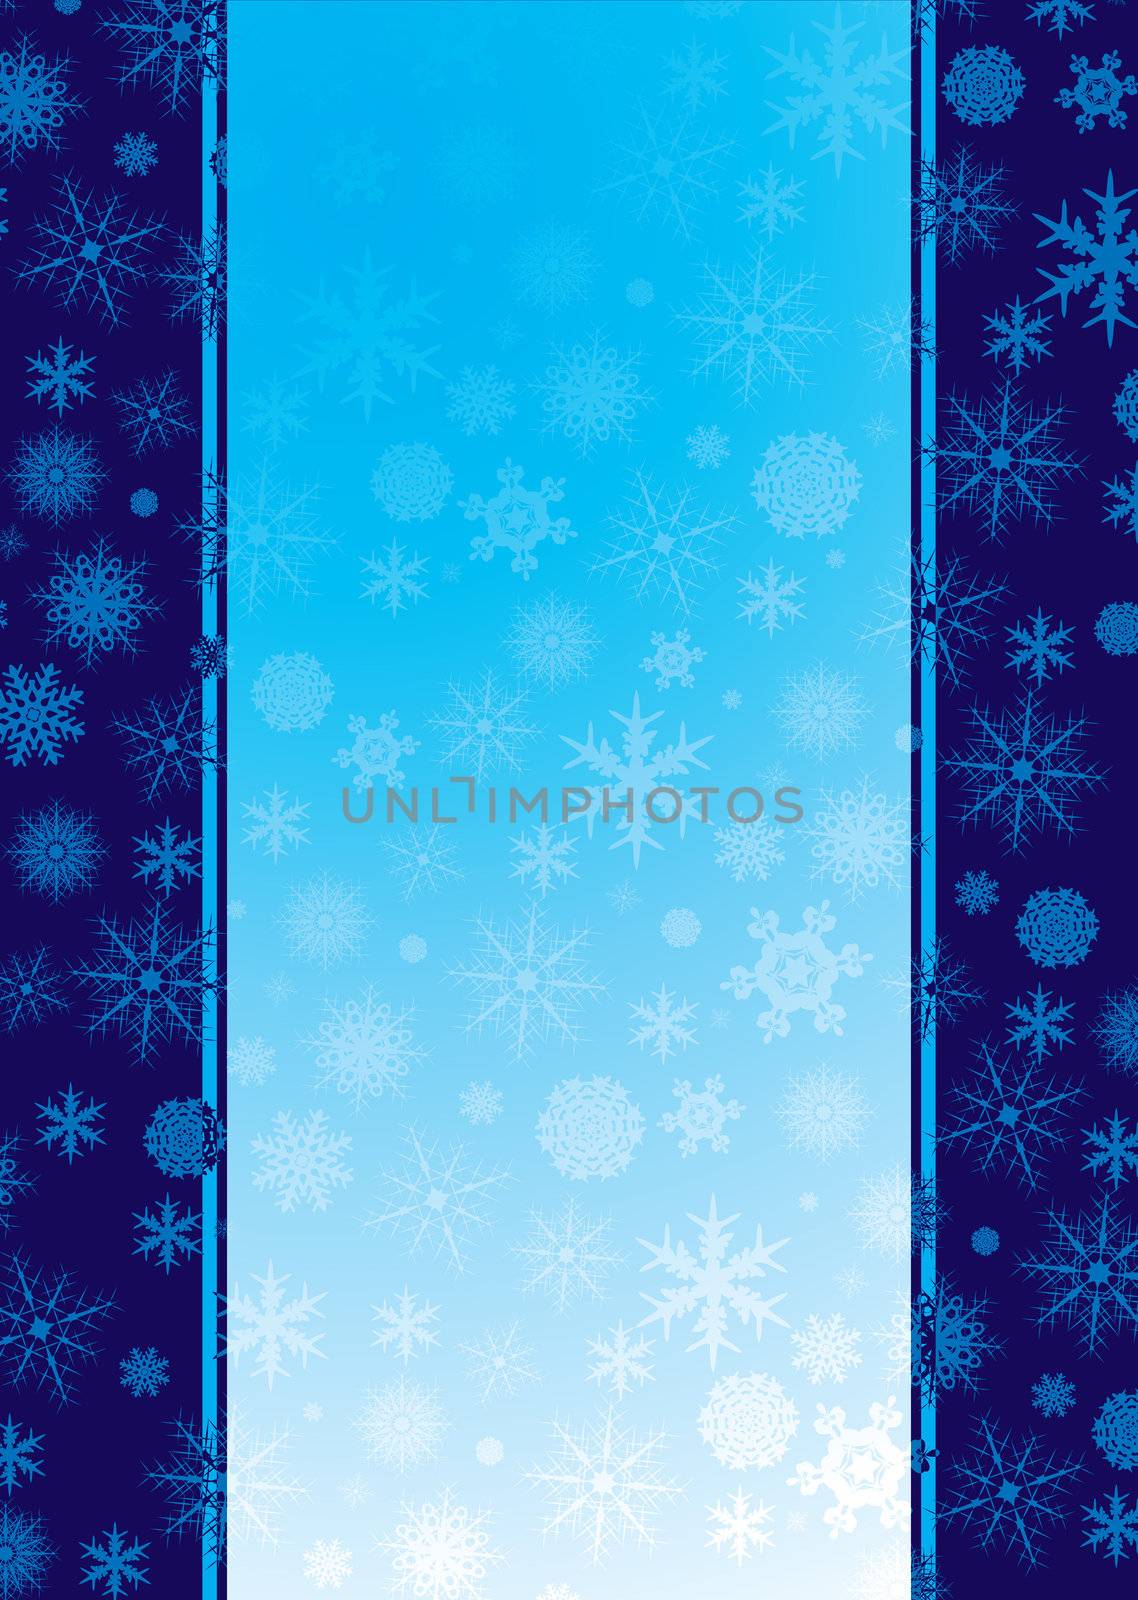 christmas inspired background in blue with snow flakes